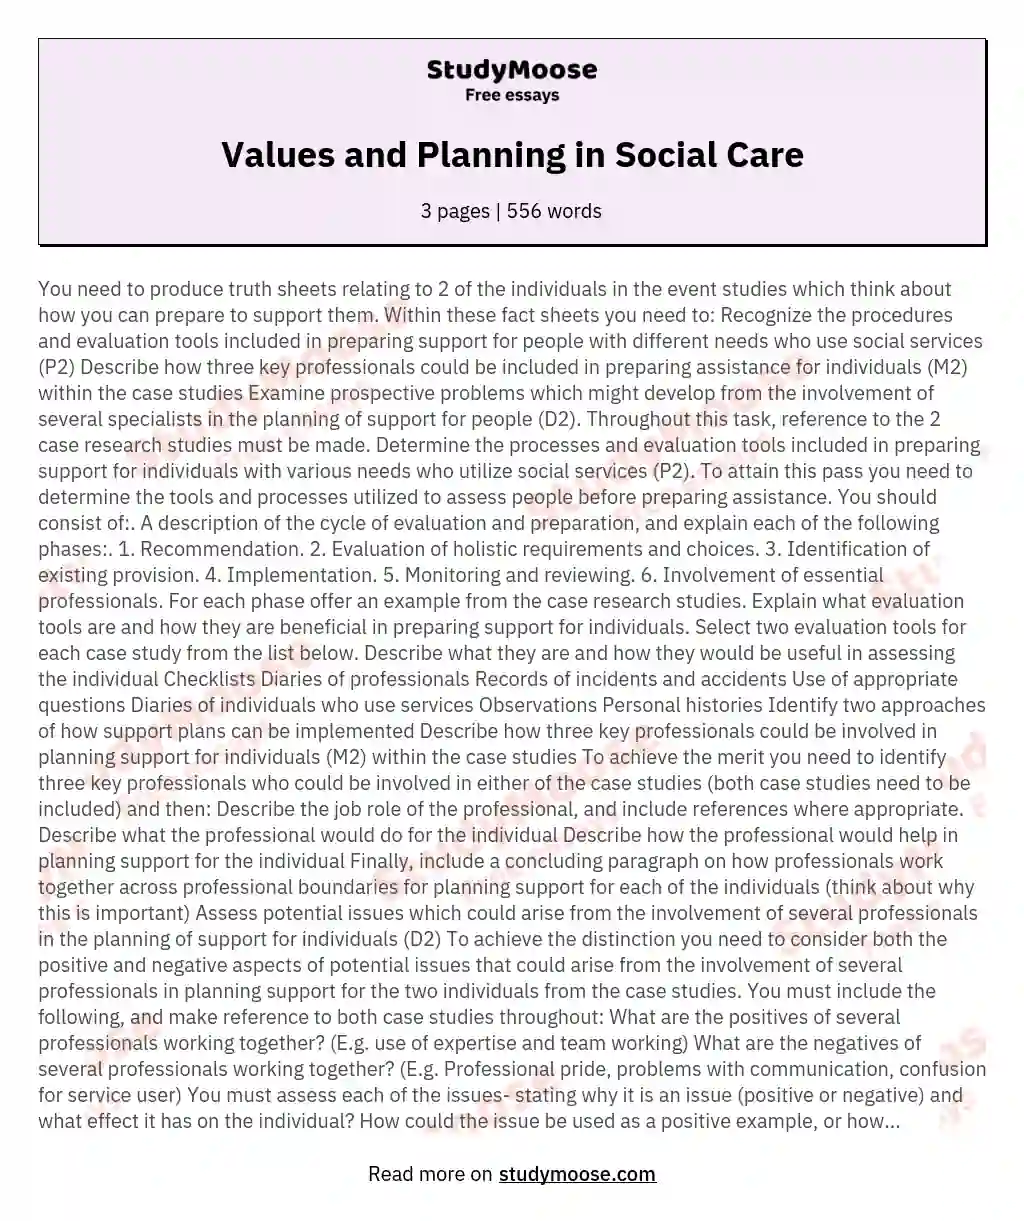 Values and Planning in Social Care essay